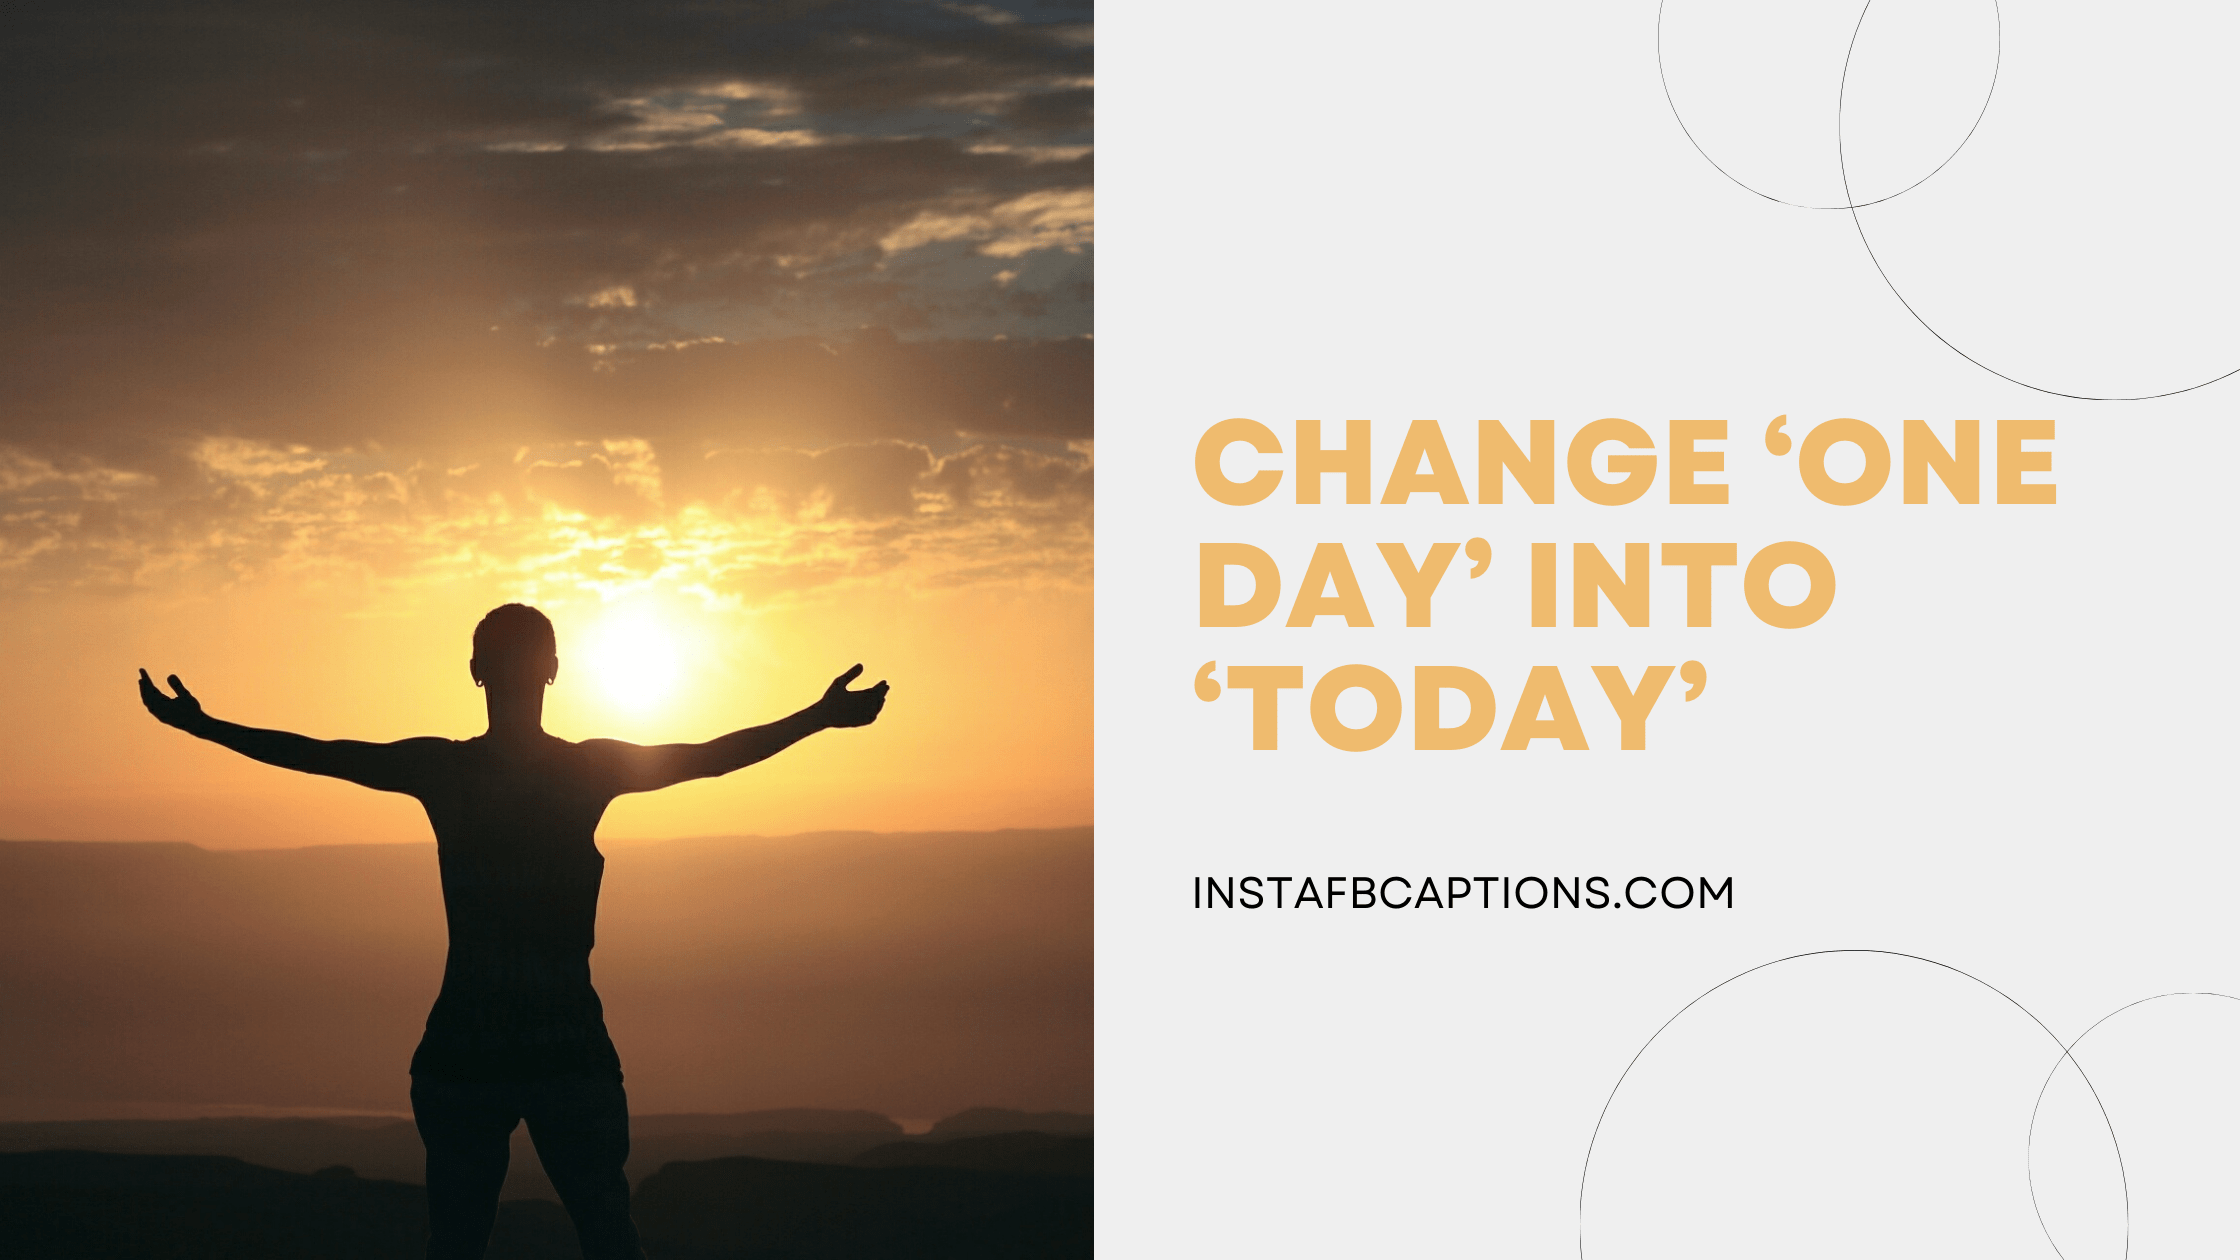 Change ‘ONE DAY’ into ‘TODAY’ attitude captions for instagram - Positive Attitude Captions - 150+ Best Attitude Captions For Instagram in 2022